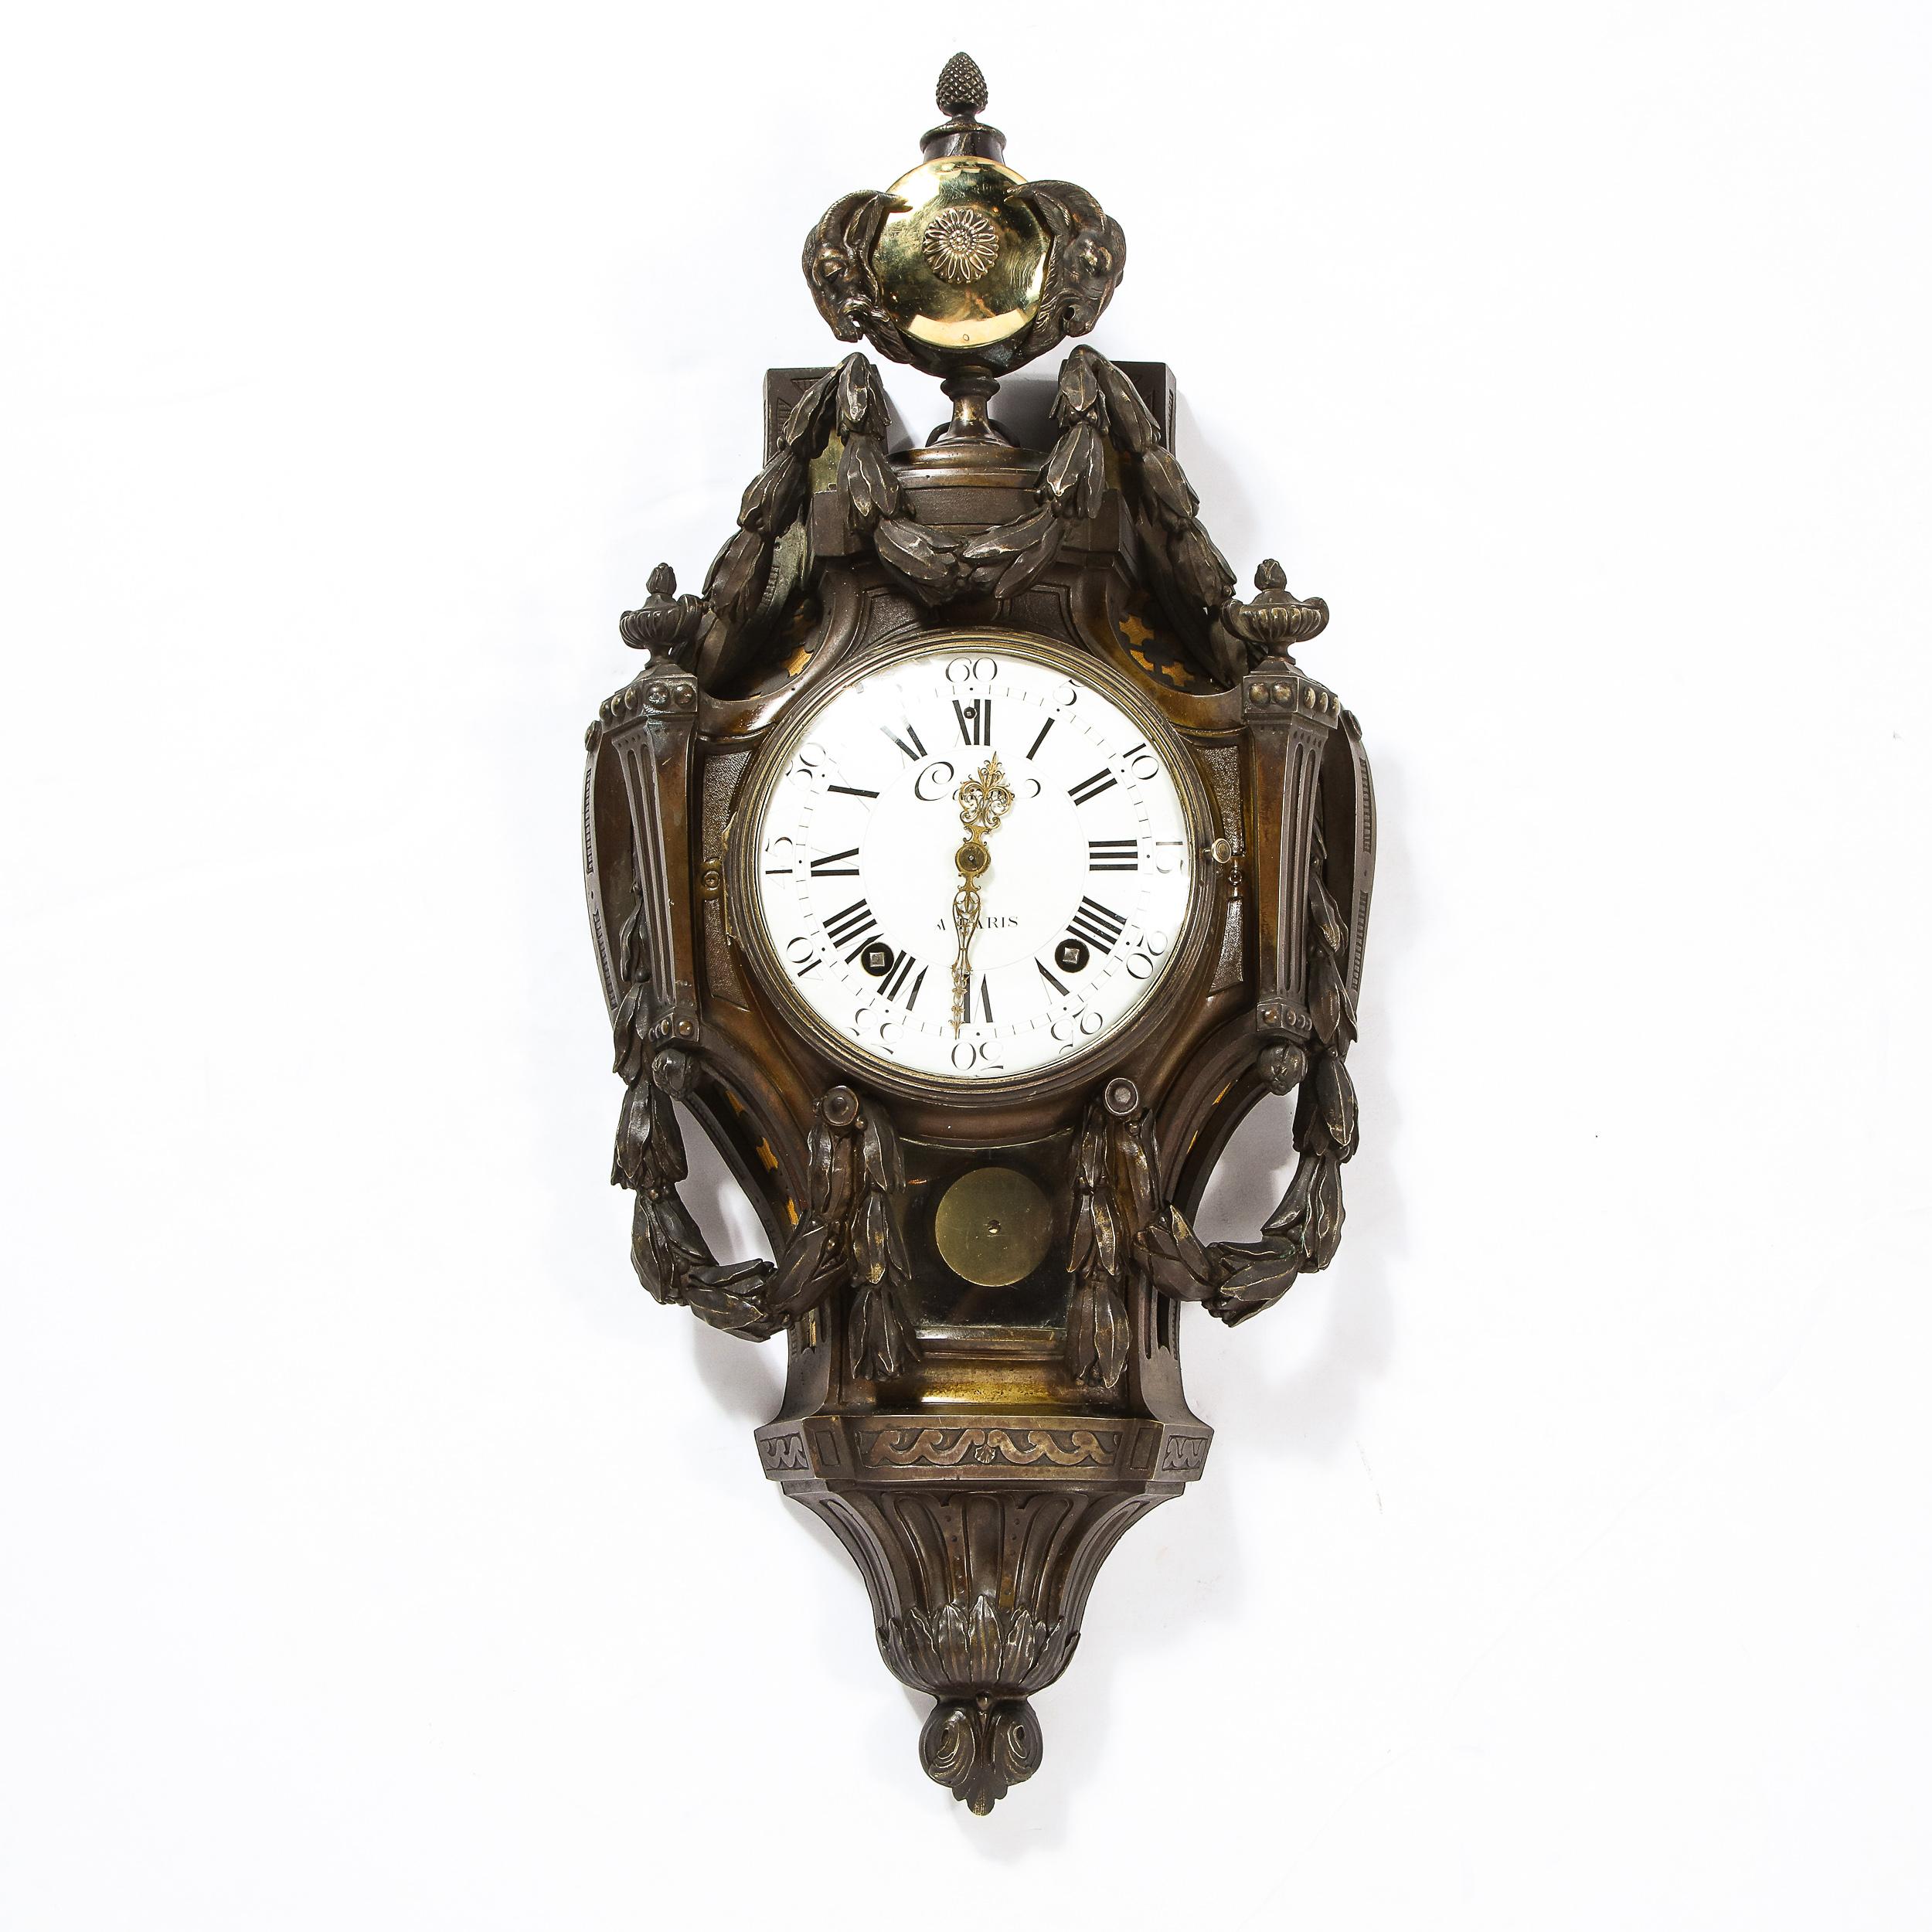 This elegant wall clock was realized in Paris, France during the 18th century by the celebrated maker Caron. It offers an ovoid body with a circular polished brass chime with a starburst motif in the center at the top flanked on either side by